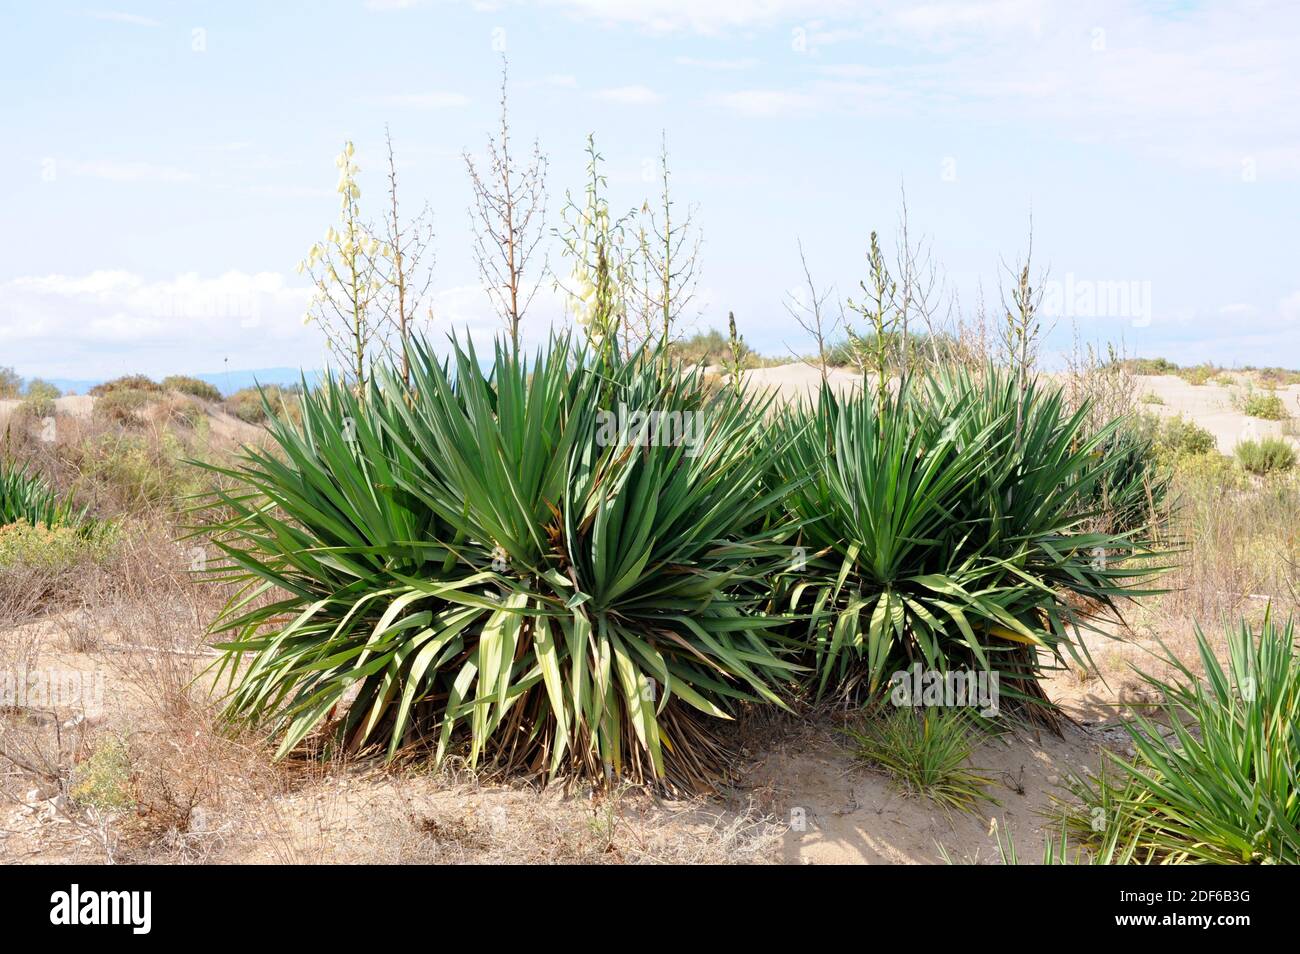 Mound lily or Spanish bayonet (Yucca gloriosa) is a shrub native to the sandy lowlands to southearsten USA but widely naturalized in others regions Stock Photo